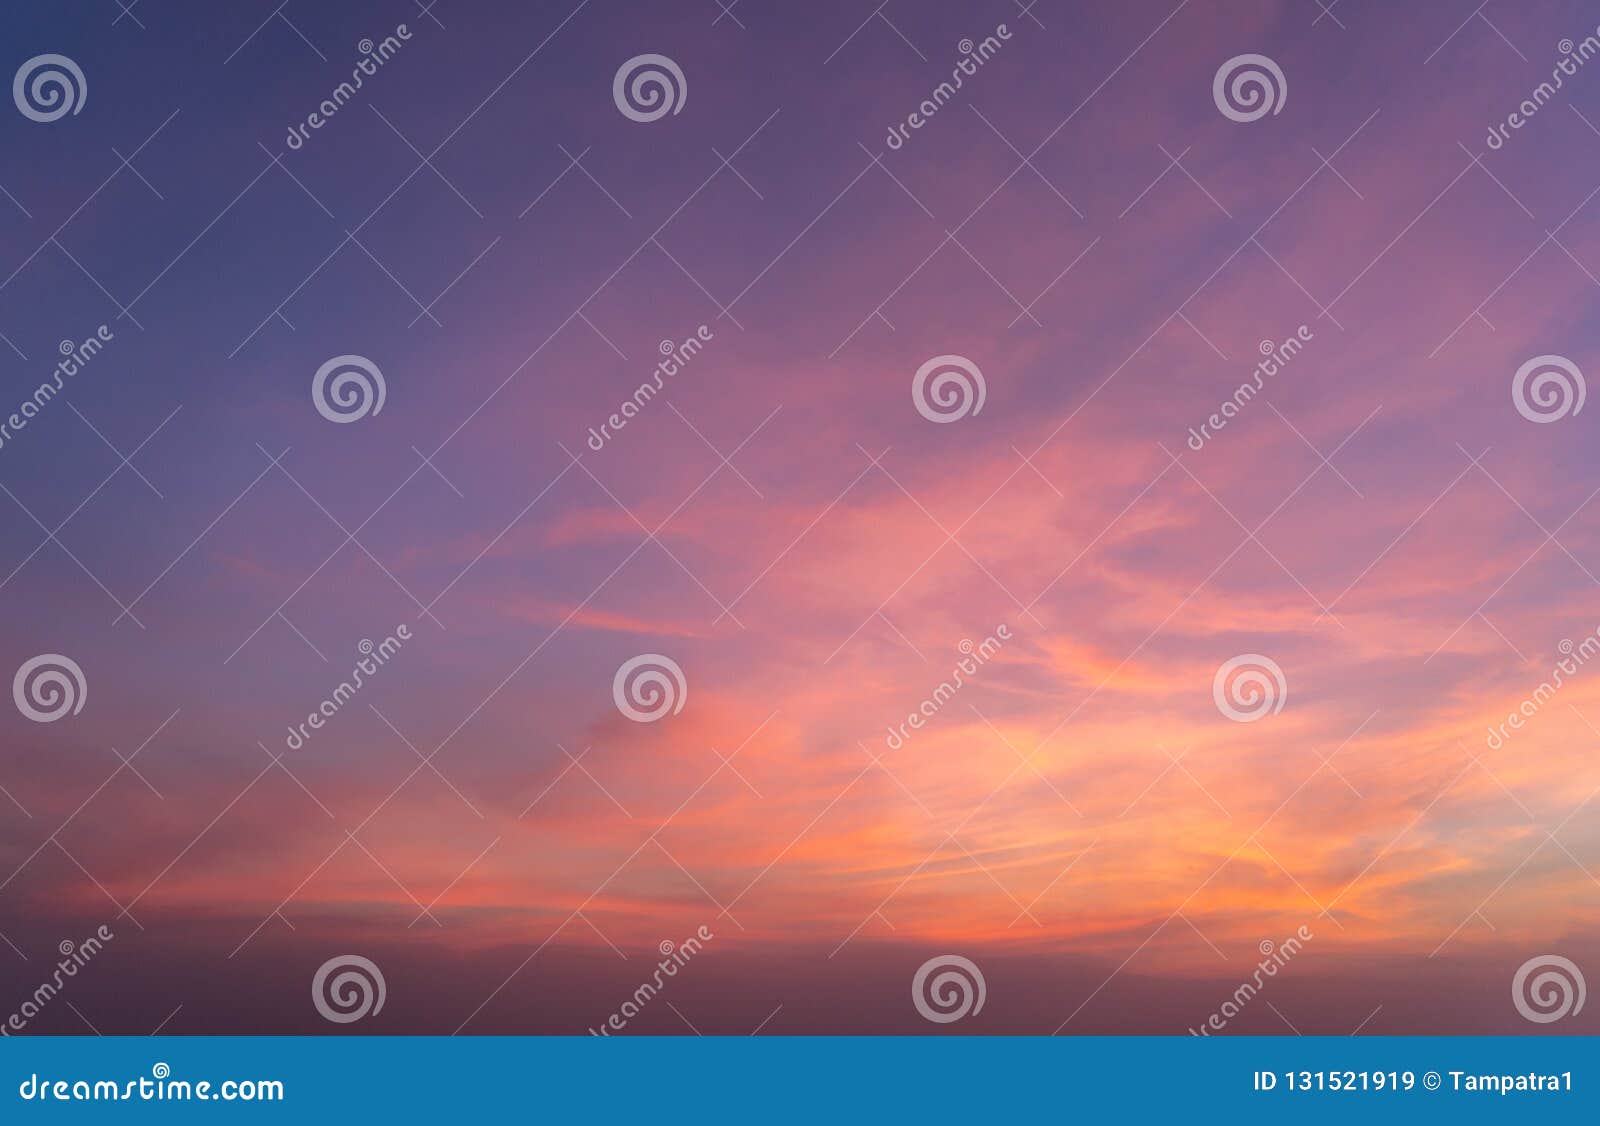 abstract nature background. dramatic blue sky with orange colorful sunset clouds in twilight time